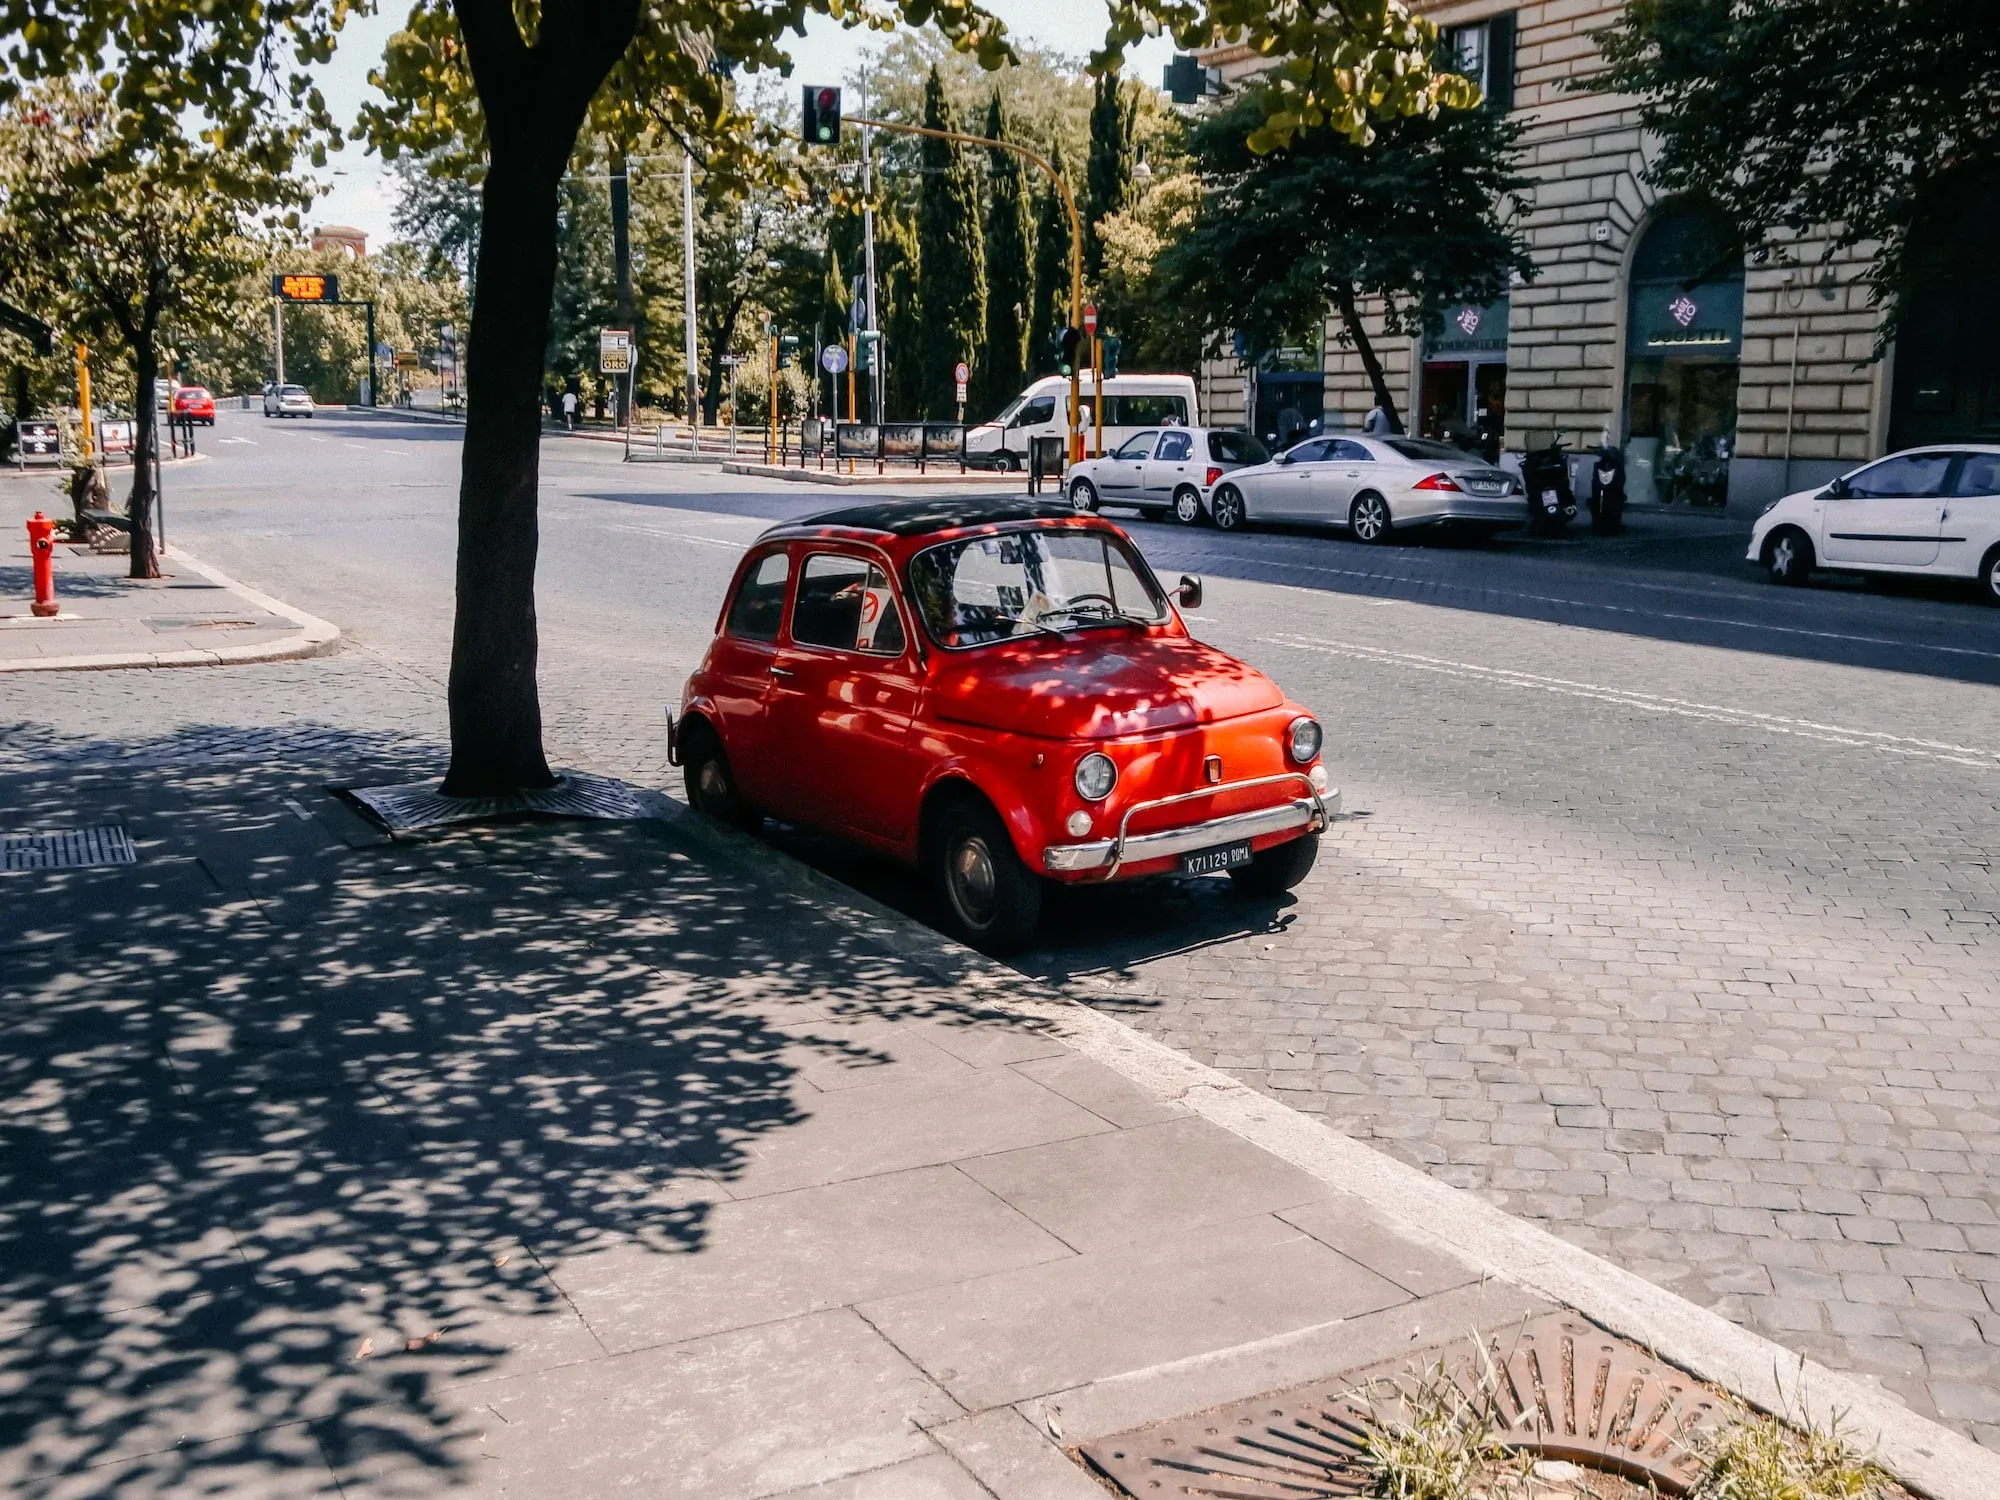 Image of a Fiat 500 in Rome, Italy